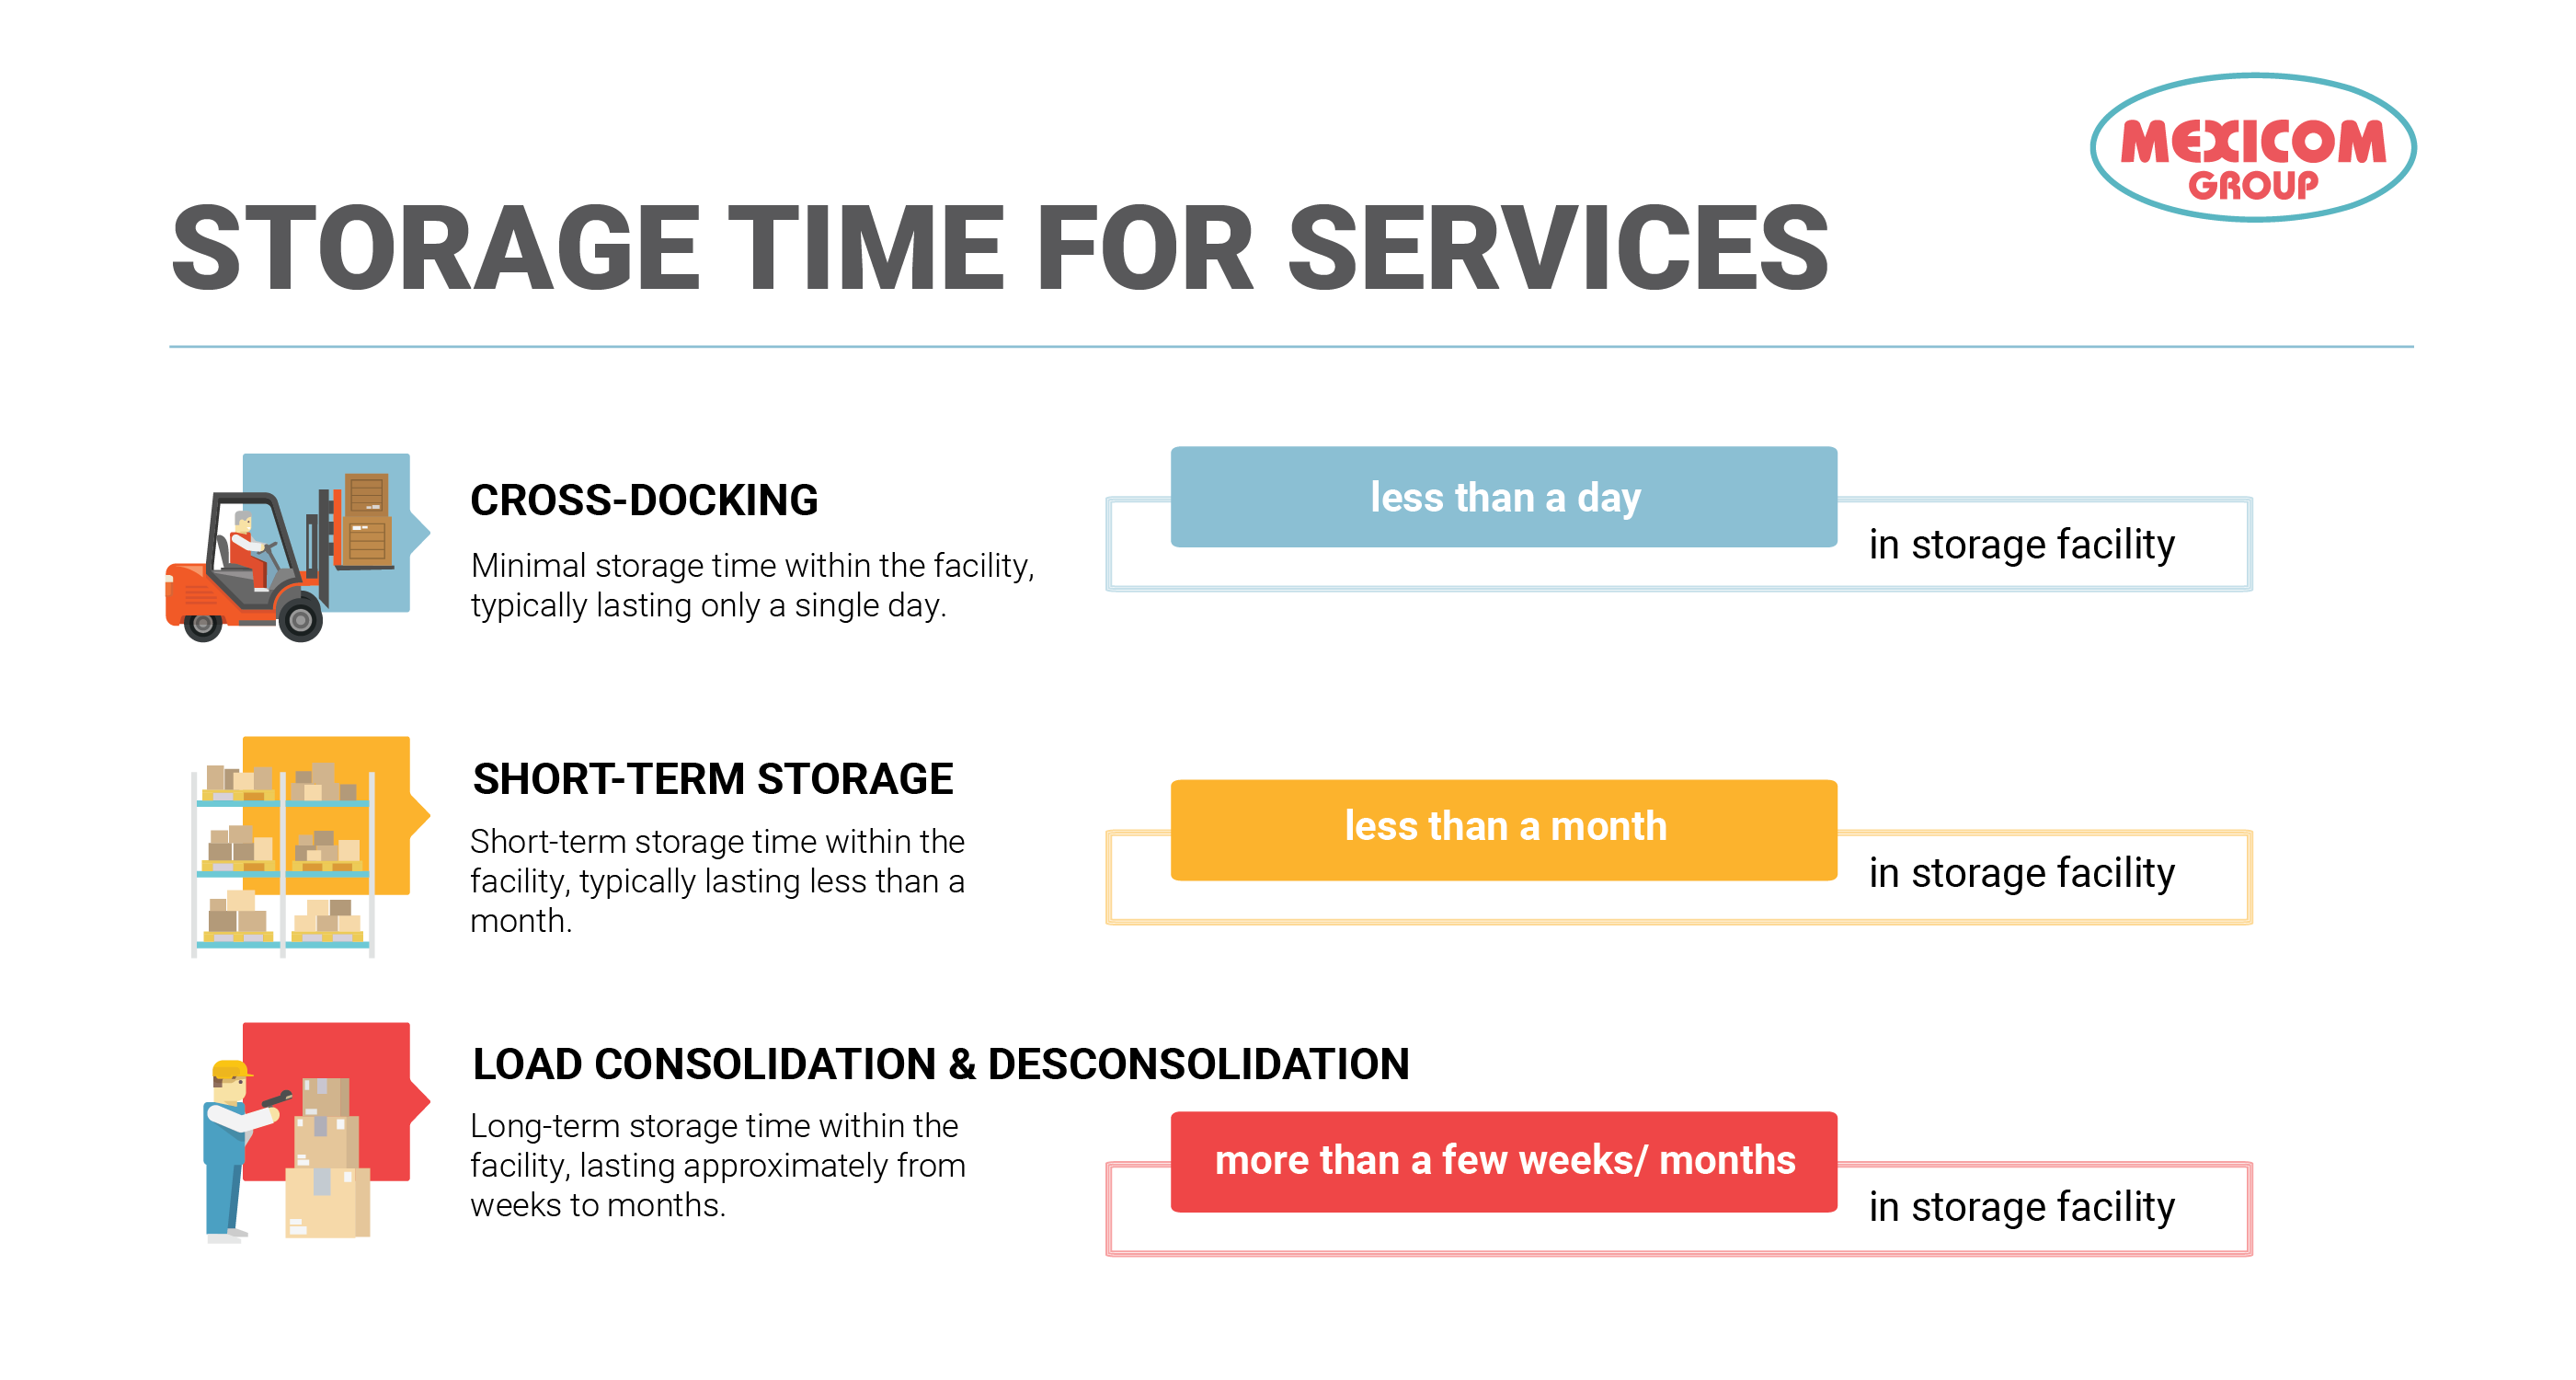 storage time for services, short-term storage and load and desconsolidation